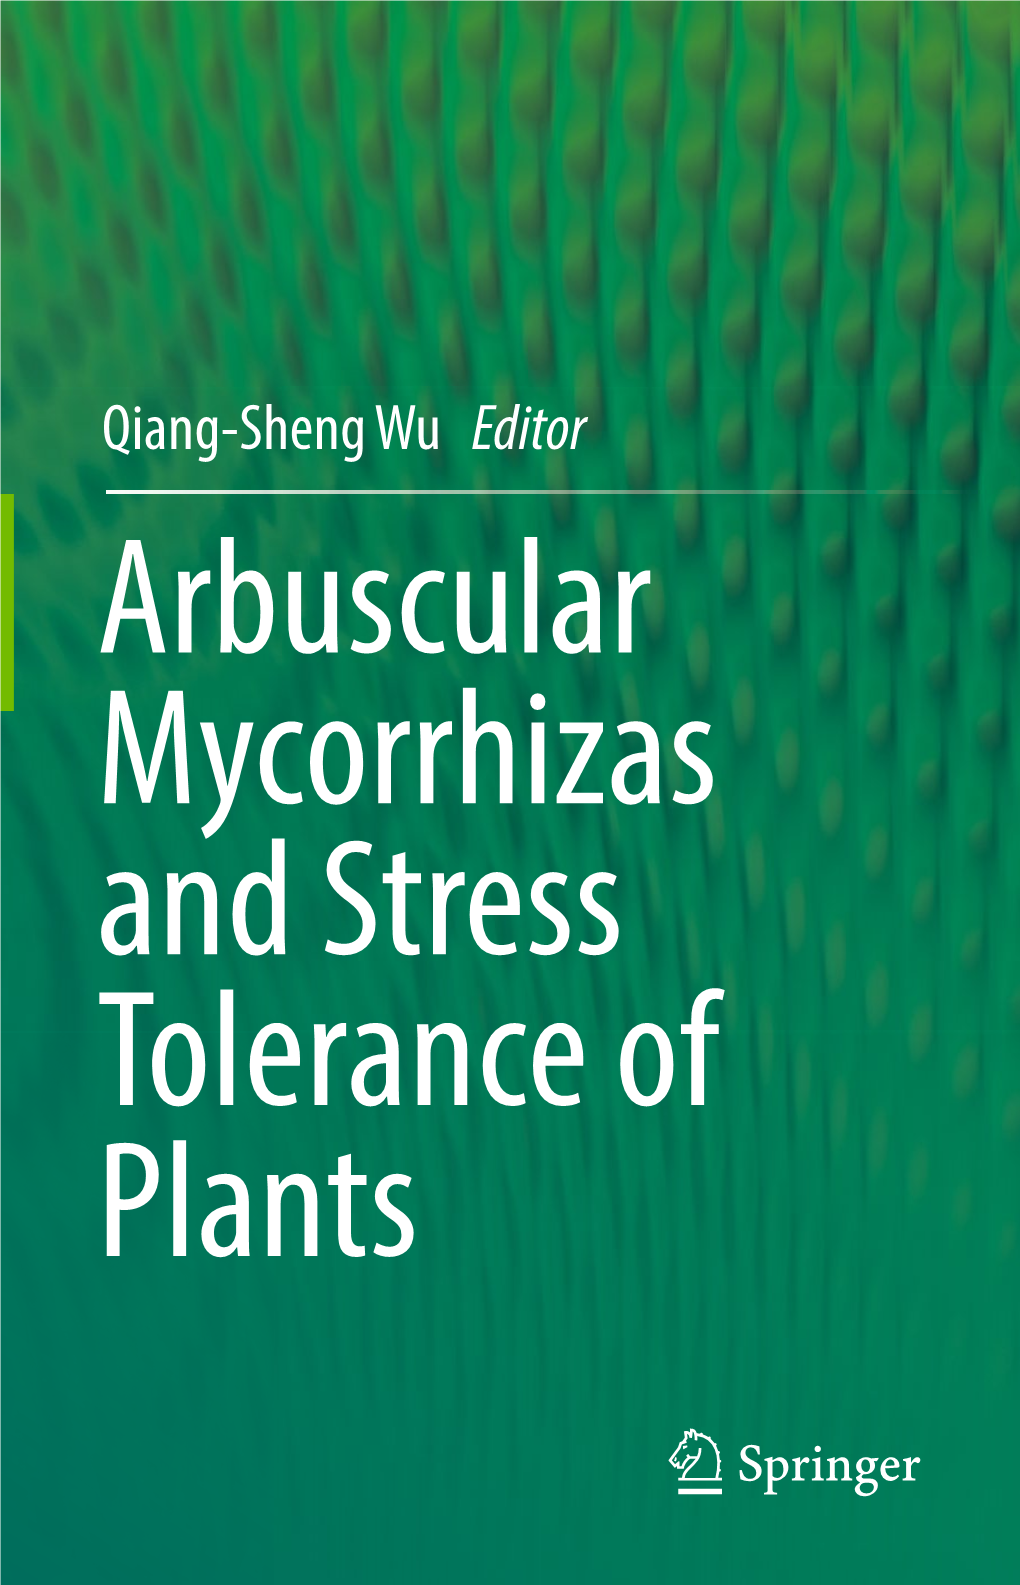 Arbuscular Mycorrhizal Fungi and Tolerance of Drought Stress in Plants